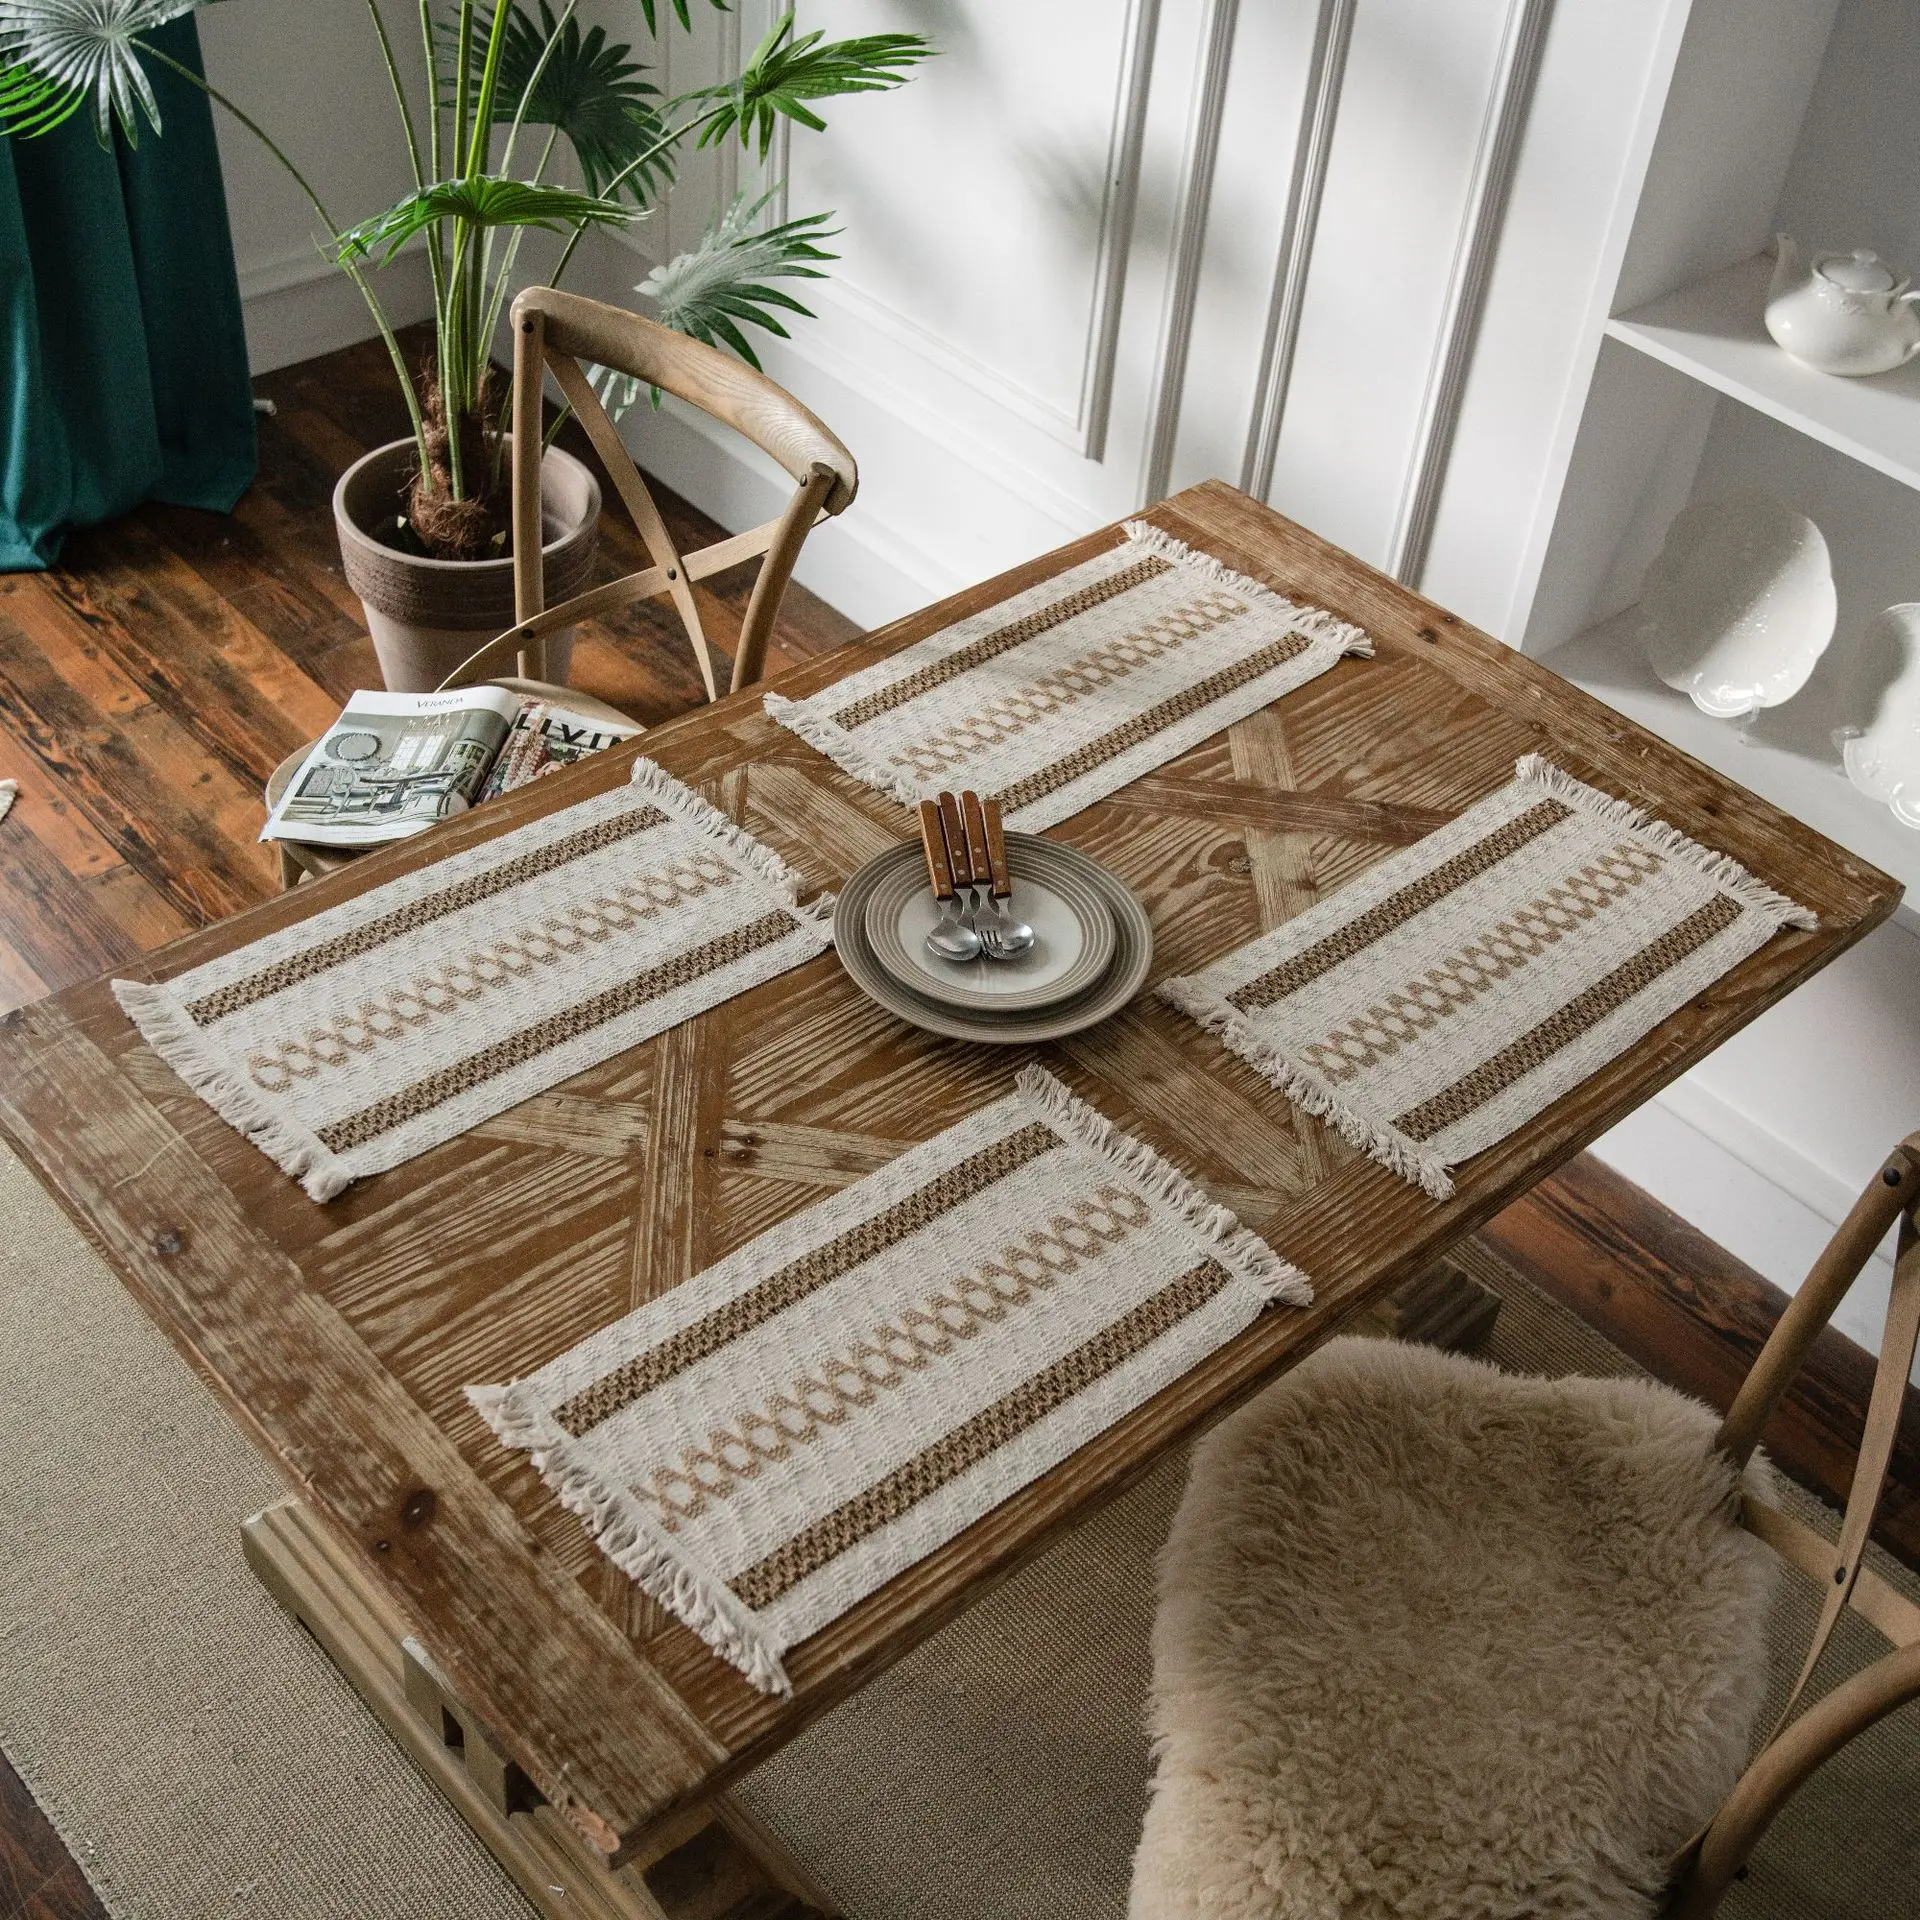 

Handmade Cotton Woven Boho Placemats Modern Farmhouse Fringe Placemats for Dining Table Woven Jute Placemats Kitchen Accessories